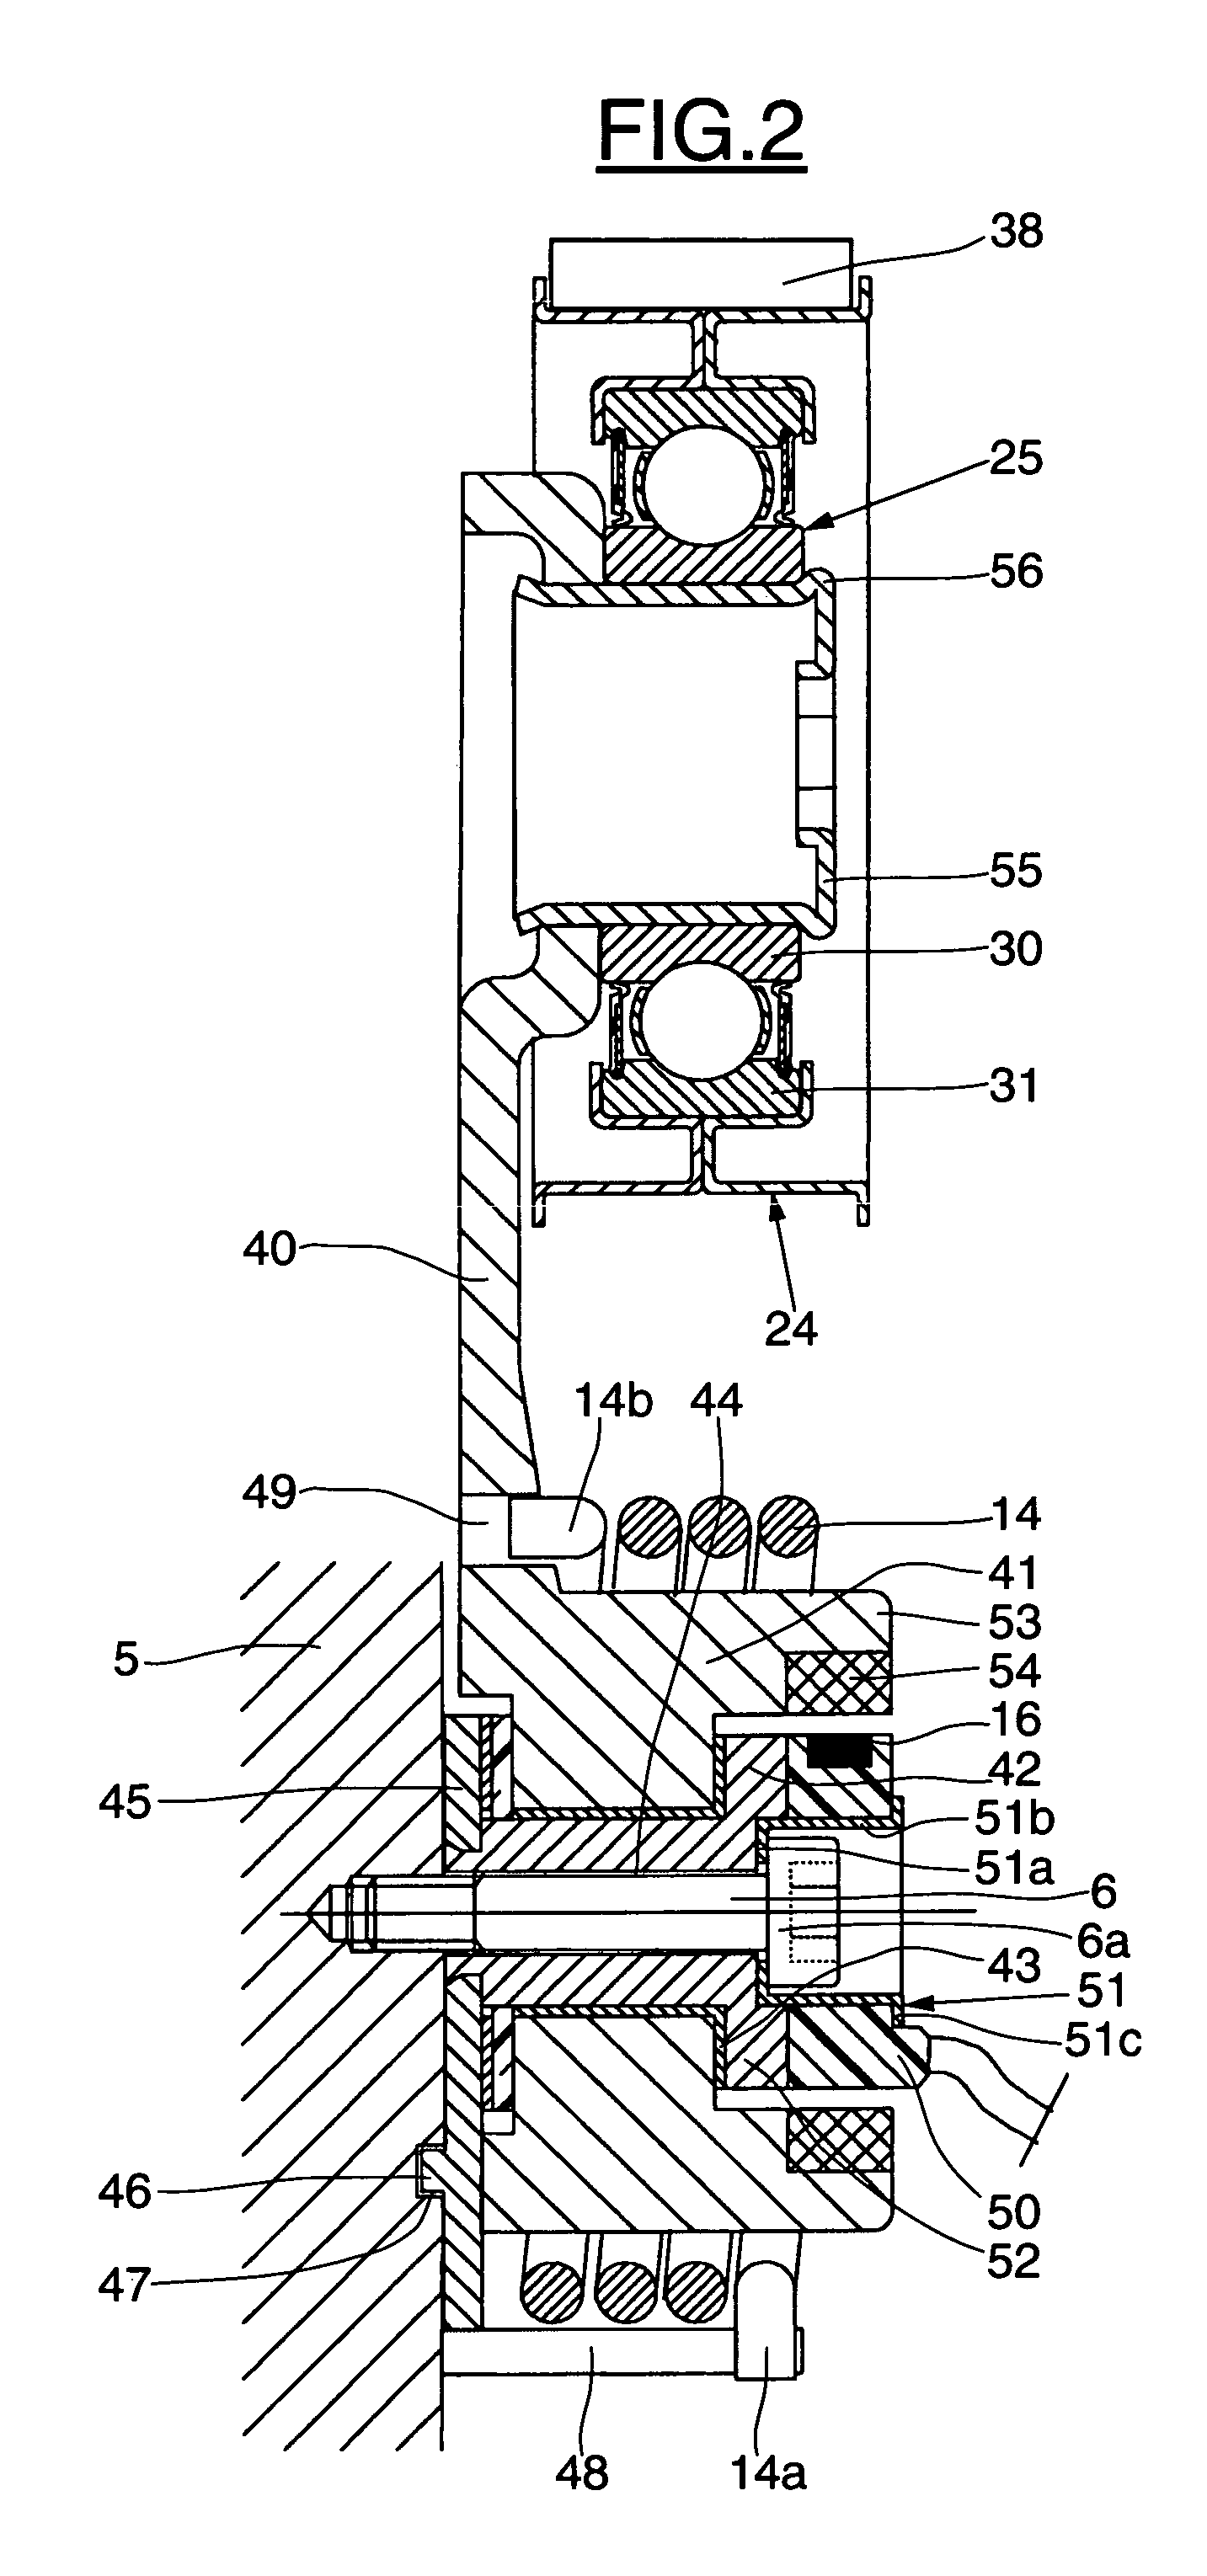 Instrumented take-up unit and related control method